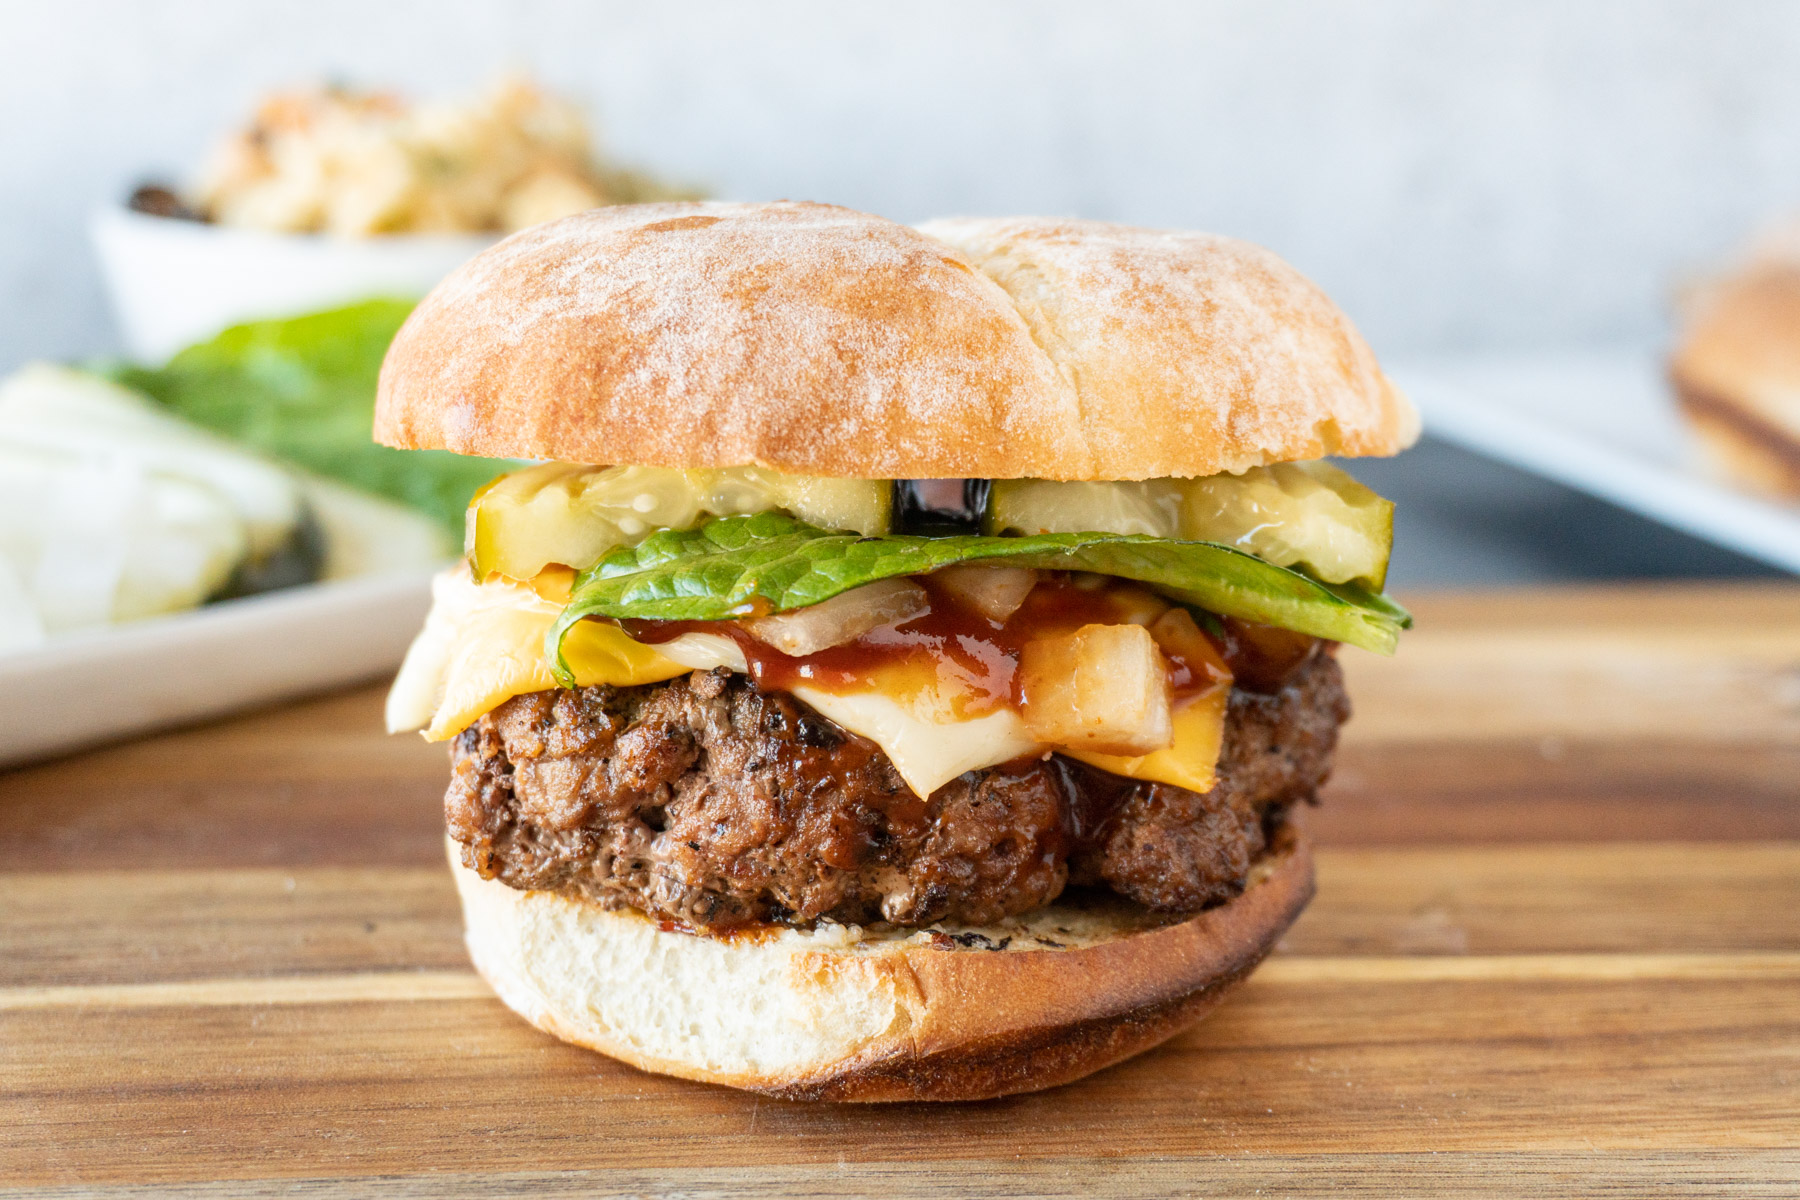 Need a Juicy Wagyu Burger Recipe? Here it is